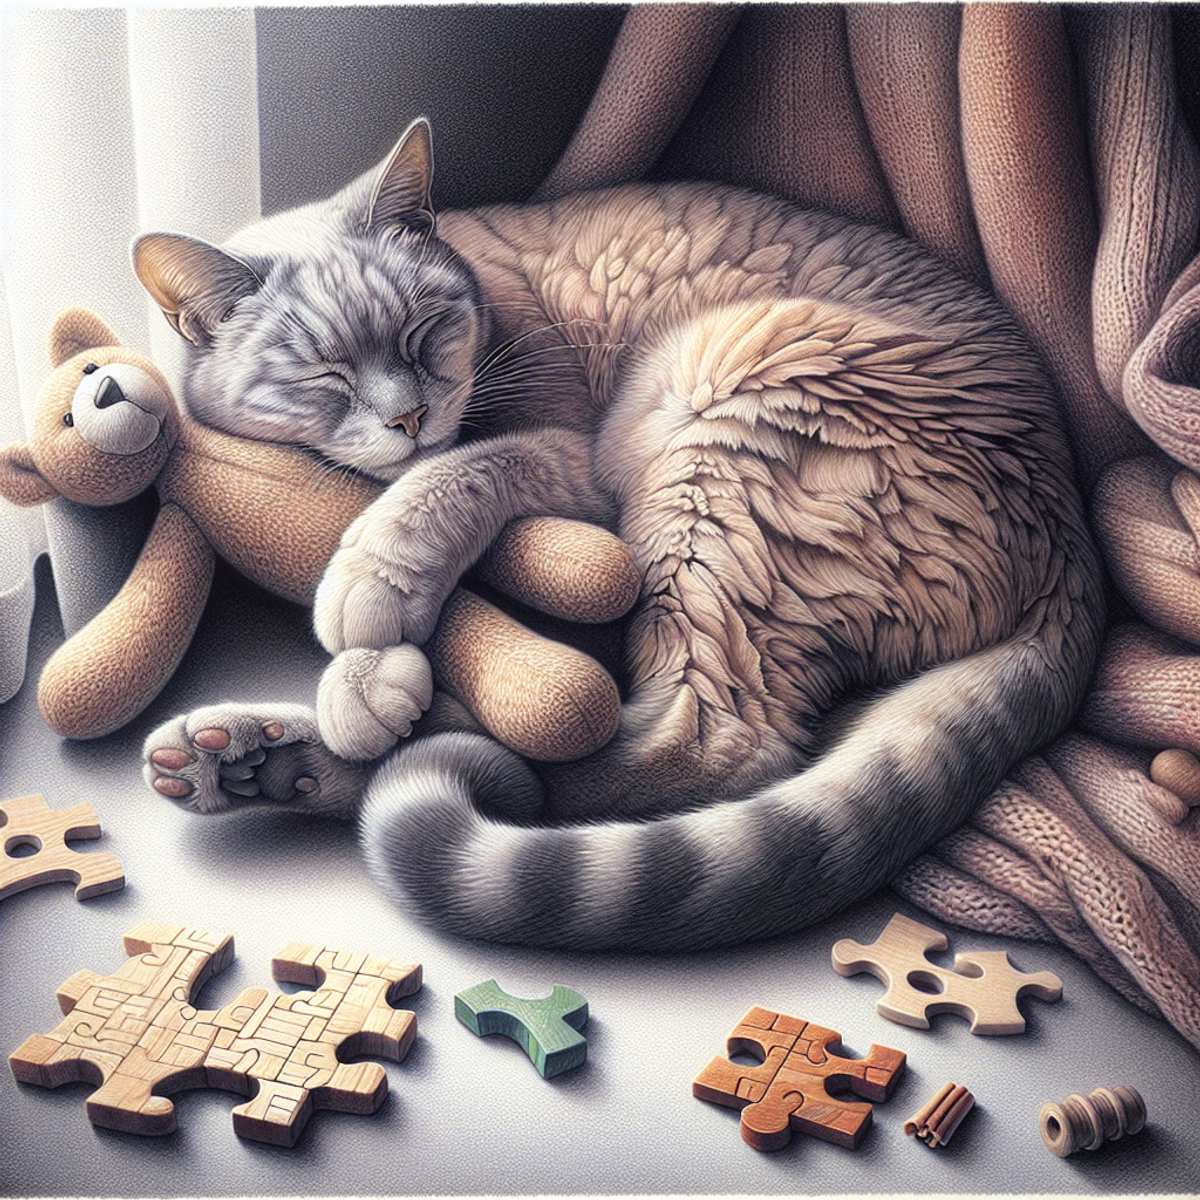 Senior cat snuggled with plush toy amidst puzzle pieces and chew toys